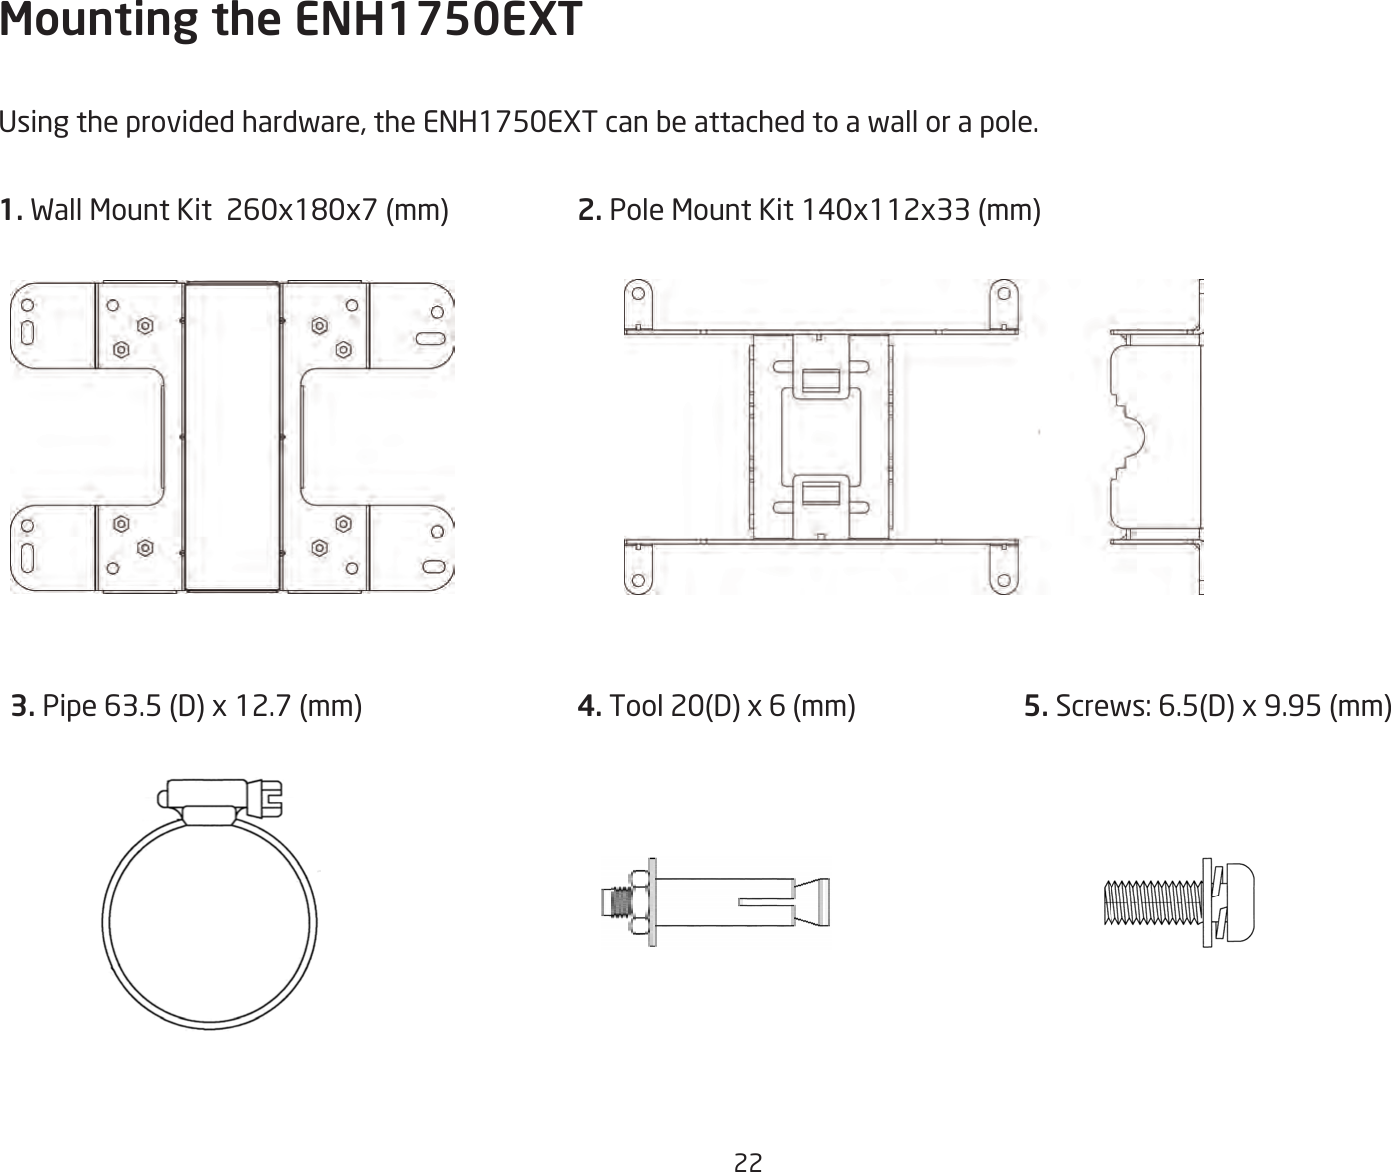 22Mounting the ENH1750EXTUsing the provided hardware, the ENH1750EXT can be attached to a wall or a pole.1. Wall Mount Kit  260x180x7 (mm)  2. Pole Mount Kit 140x112x33 (mm) 3. Pipe 63.5 (D) x 12.7 (mm)  4. Tool 20(D) x 6 (mm) 5. Screws: 6.5(D) x 9.95 (mm)